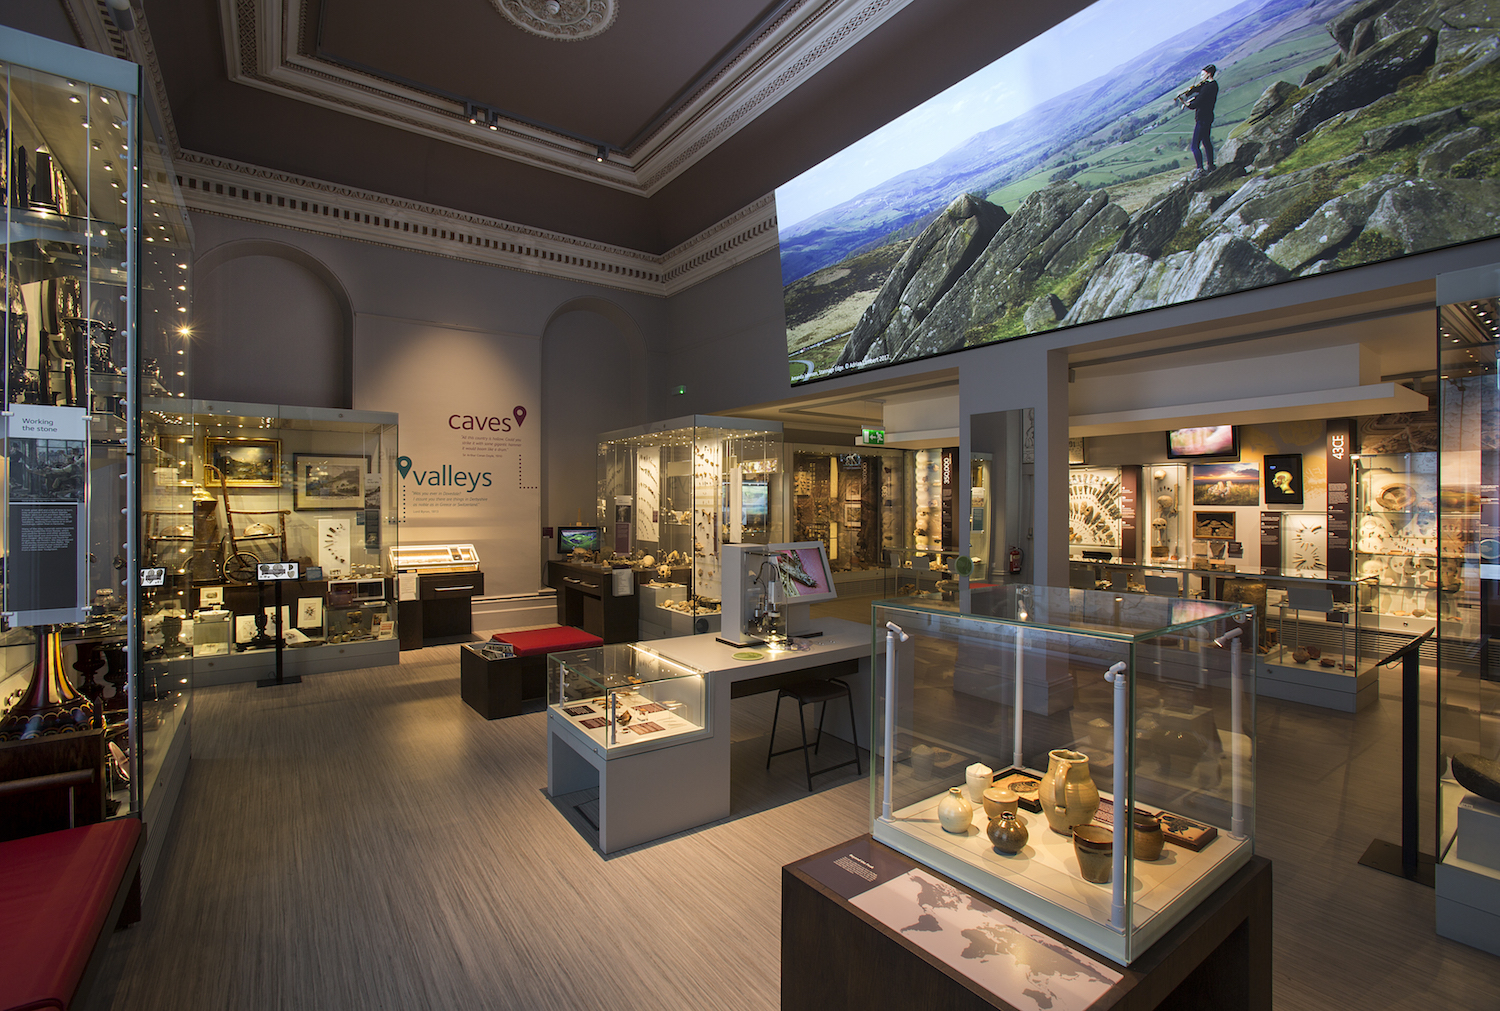 Temporary closure announced at Buxton Museum & Art Gallery